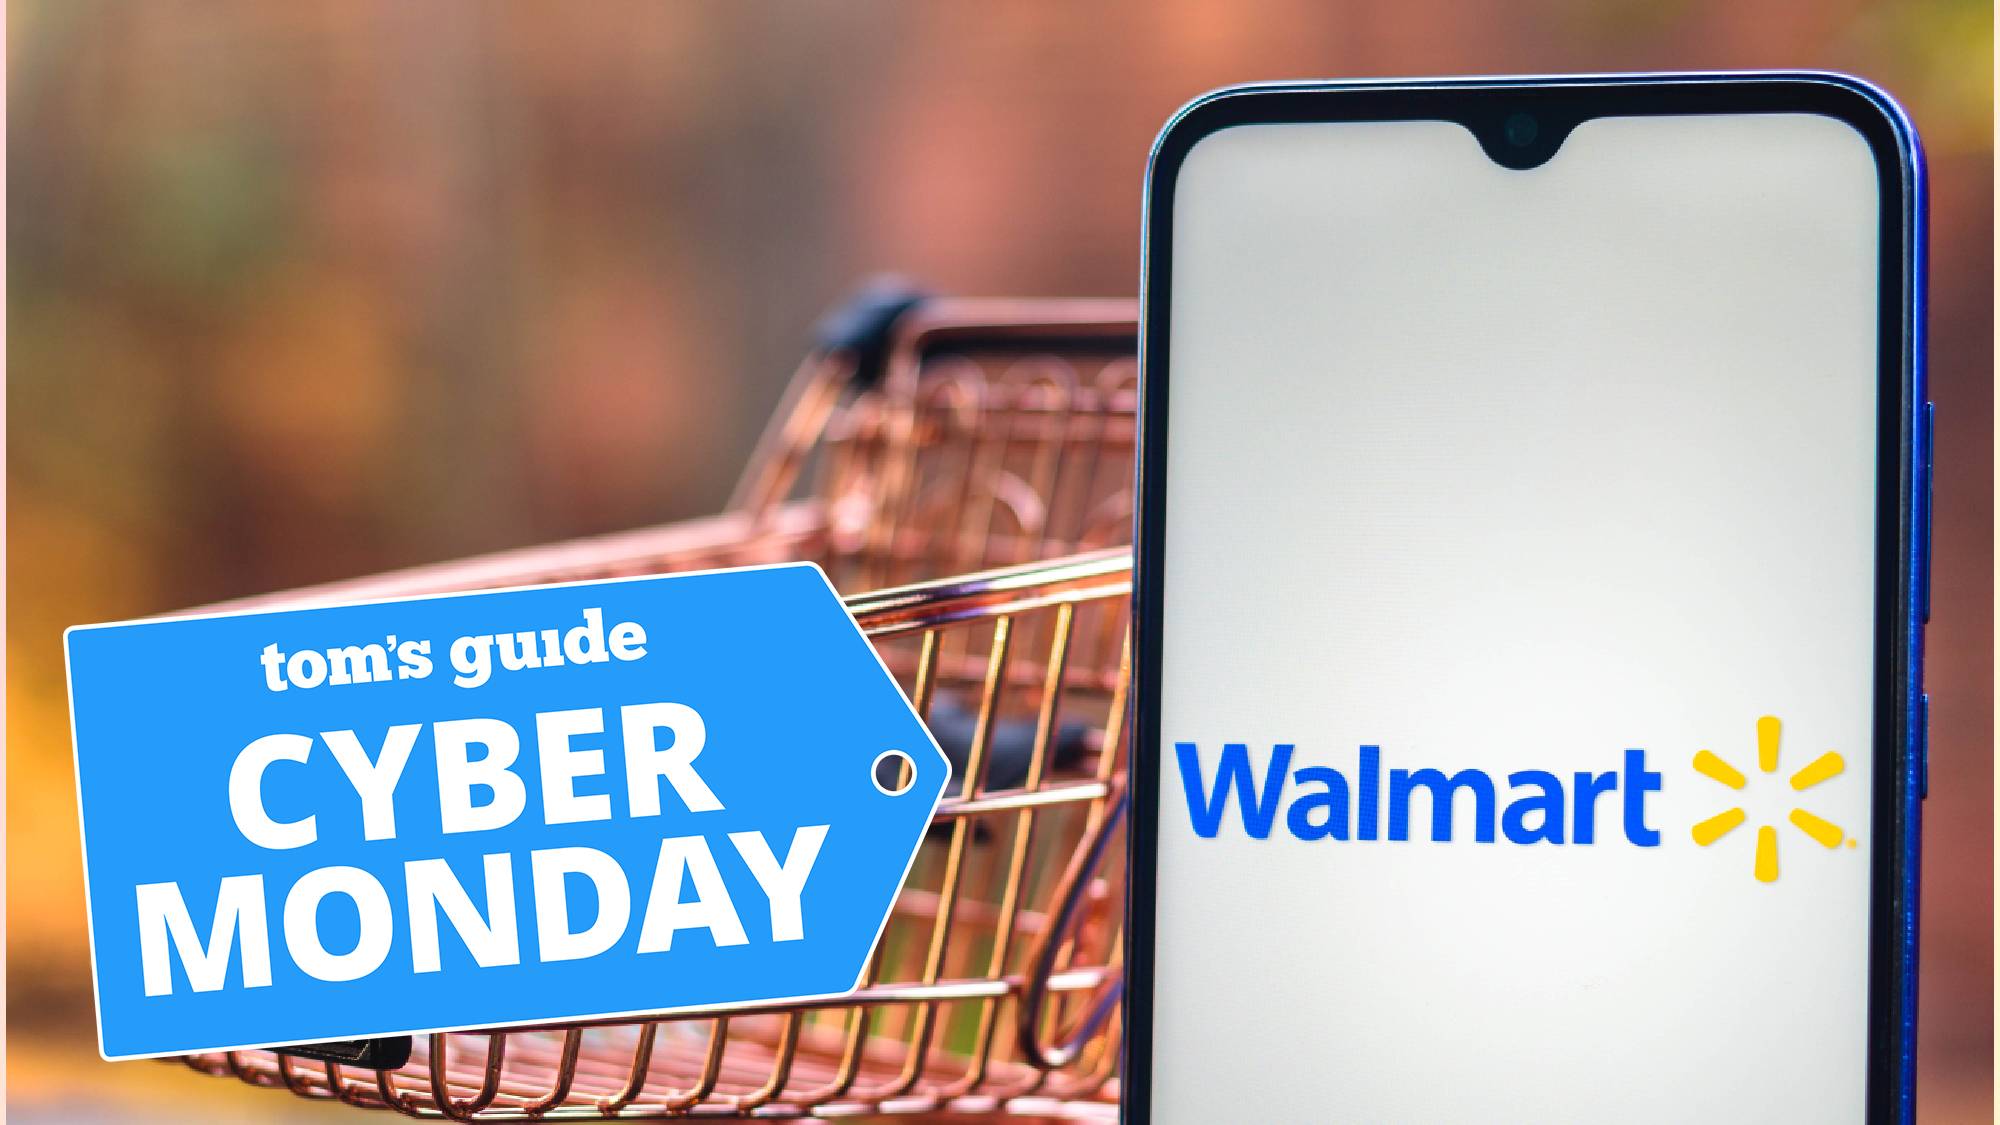 Walmart logo on a phone screen with a Cyber Monday deal tag